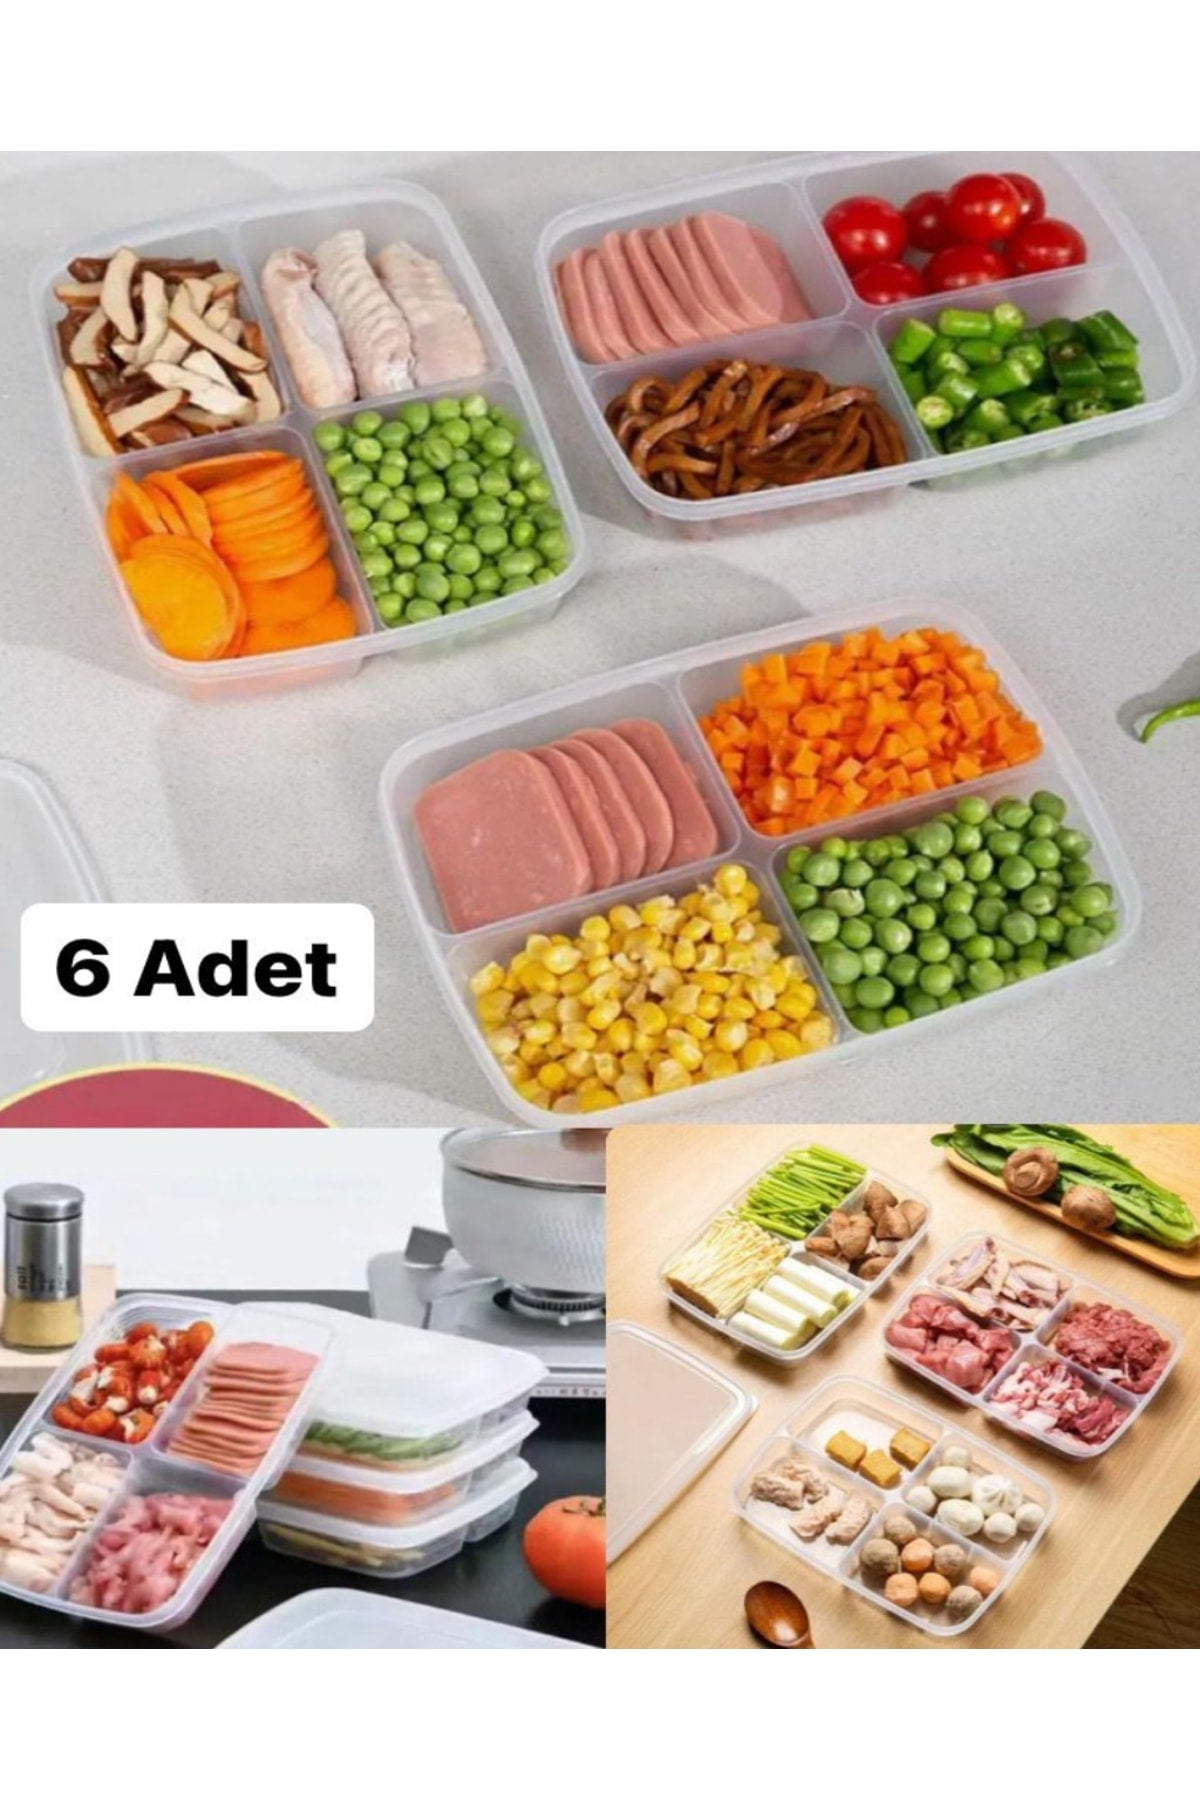 6 Pieces 4 Compartments Meal Vegetable Storage Container Legumes Peas Corn Refrigerator Storage Box